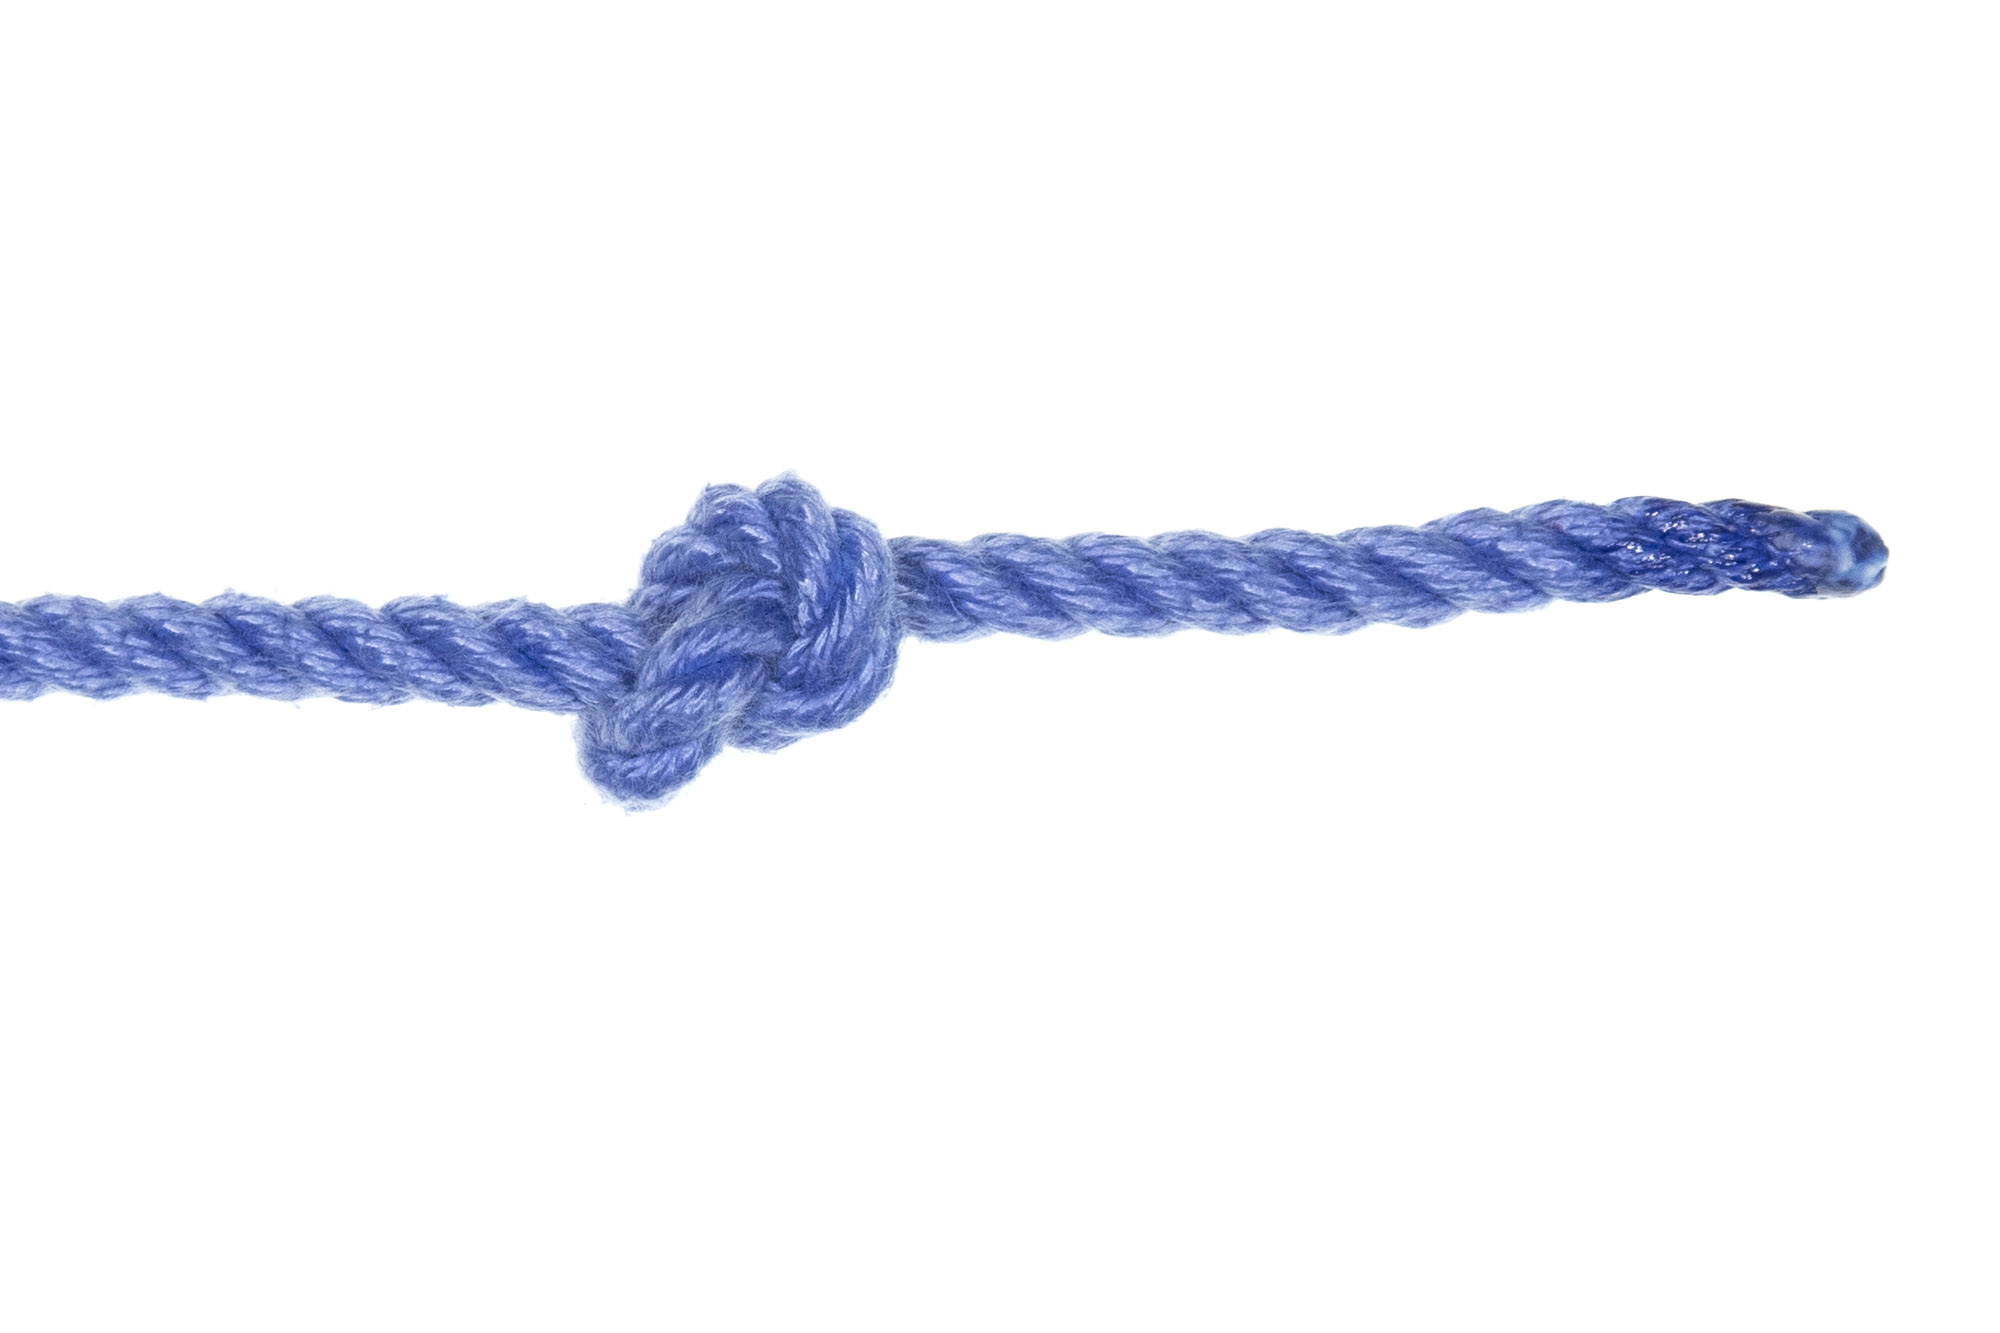 An overhand knot tied in a single length of blue rope. The knot is small and compact, with three inches of working end coming out of it.